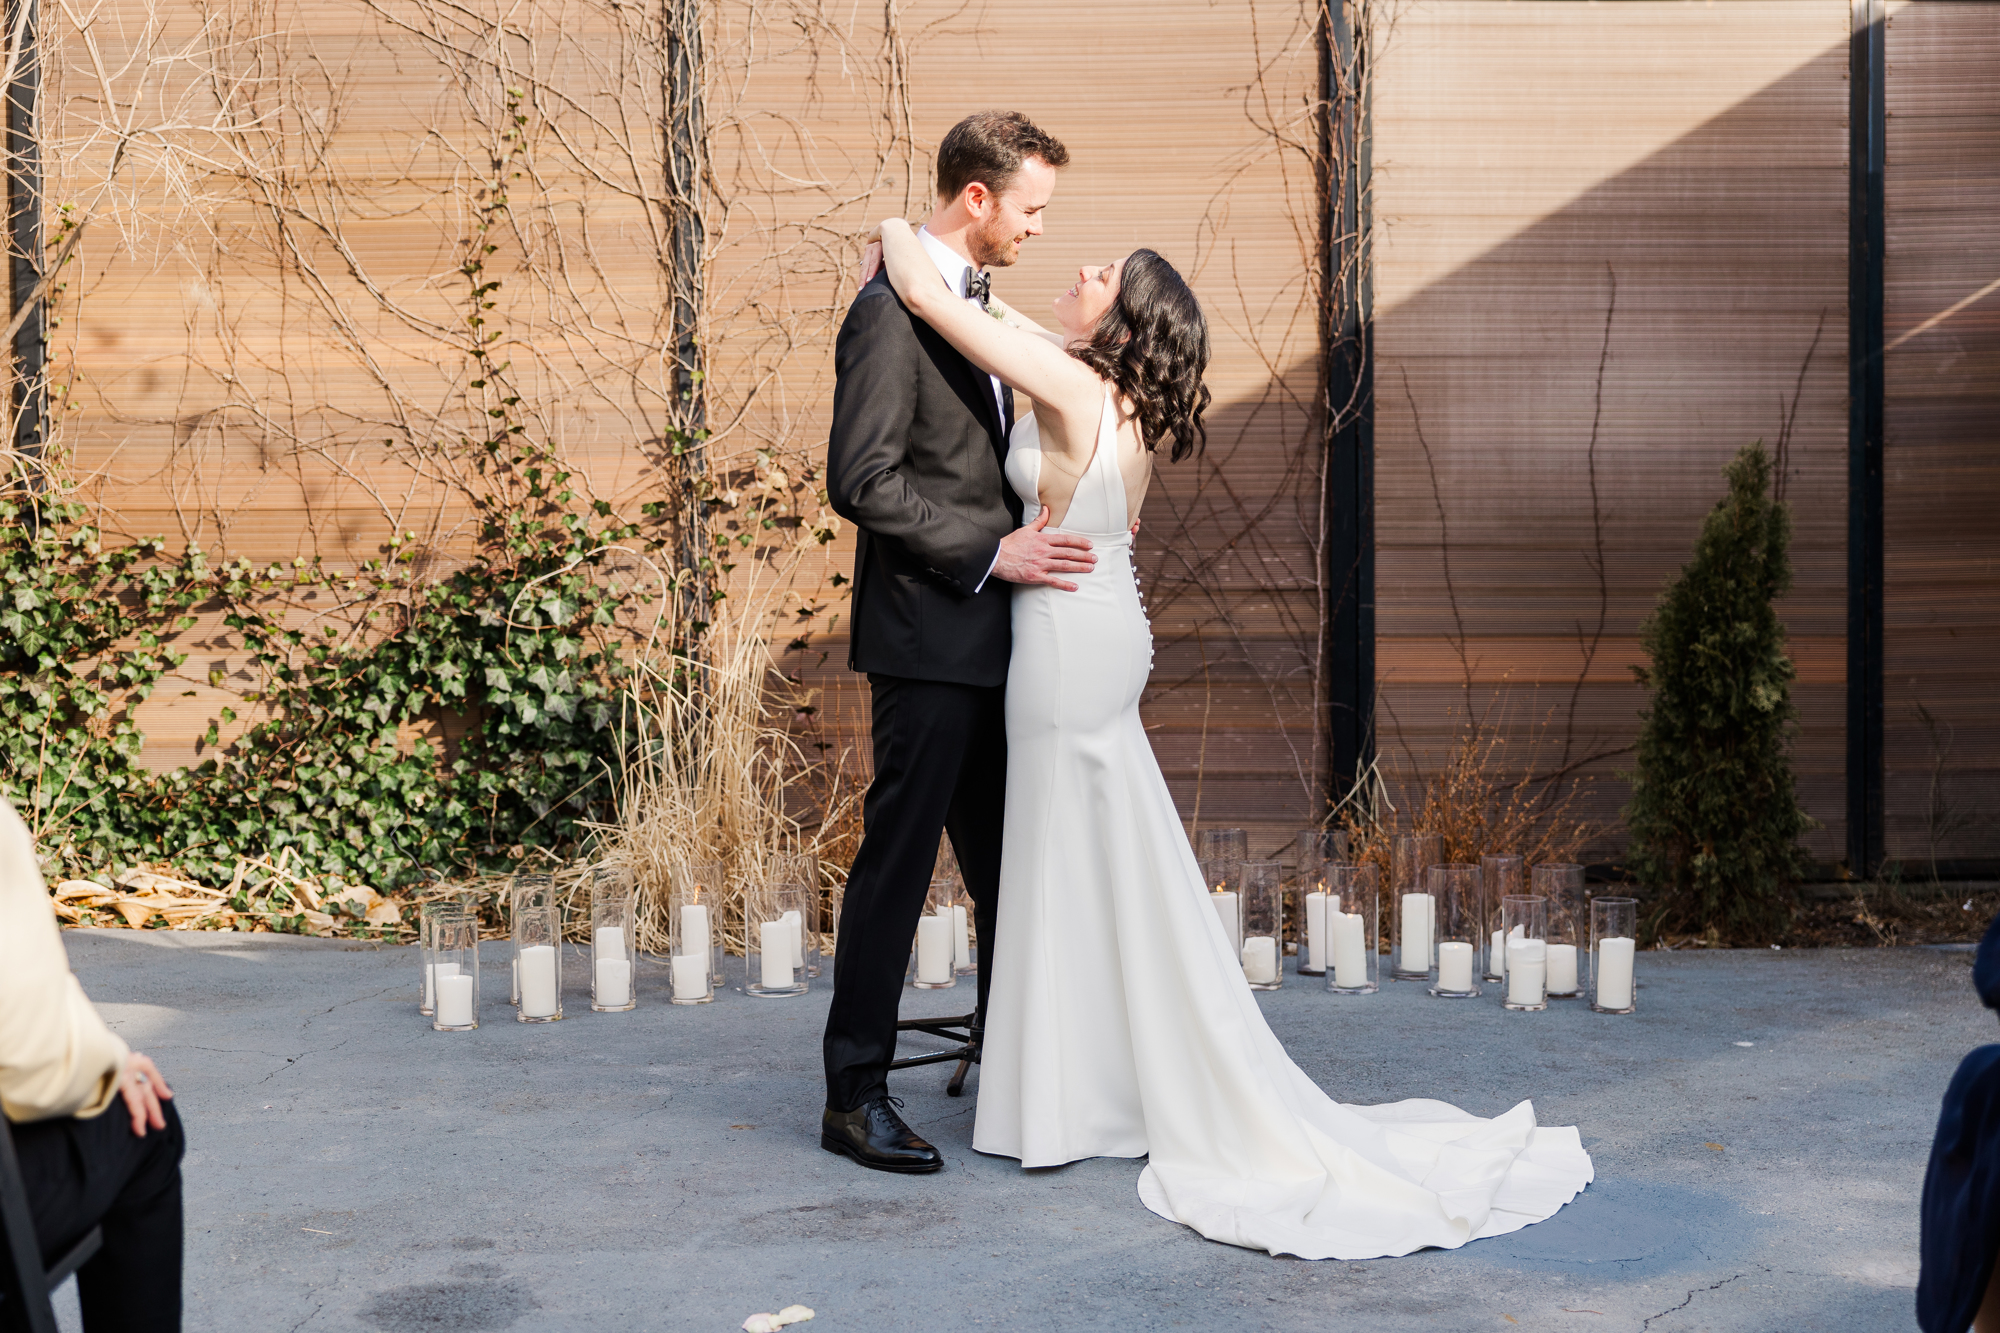 Remarkable Spring Wedding Photos at The Green Building in Brooklyn NY